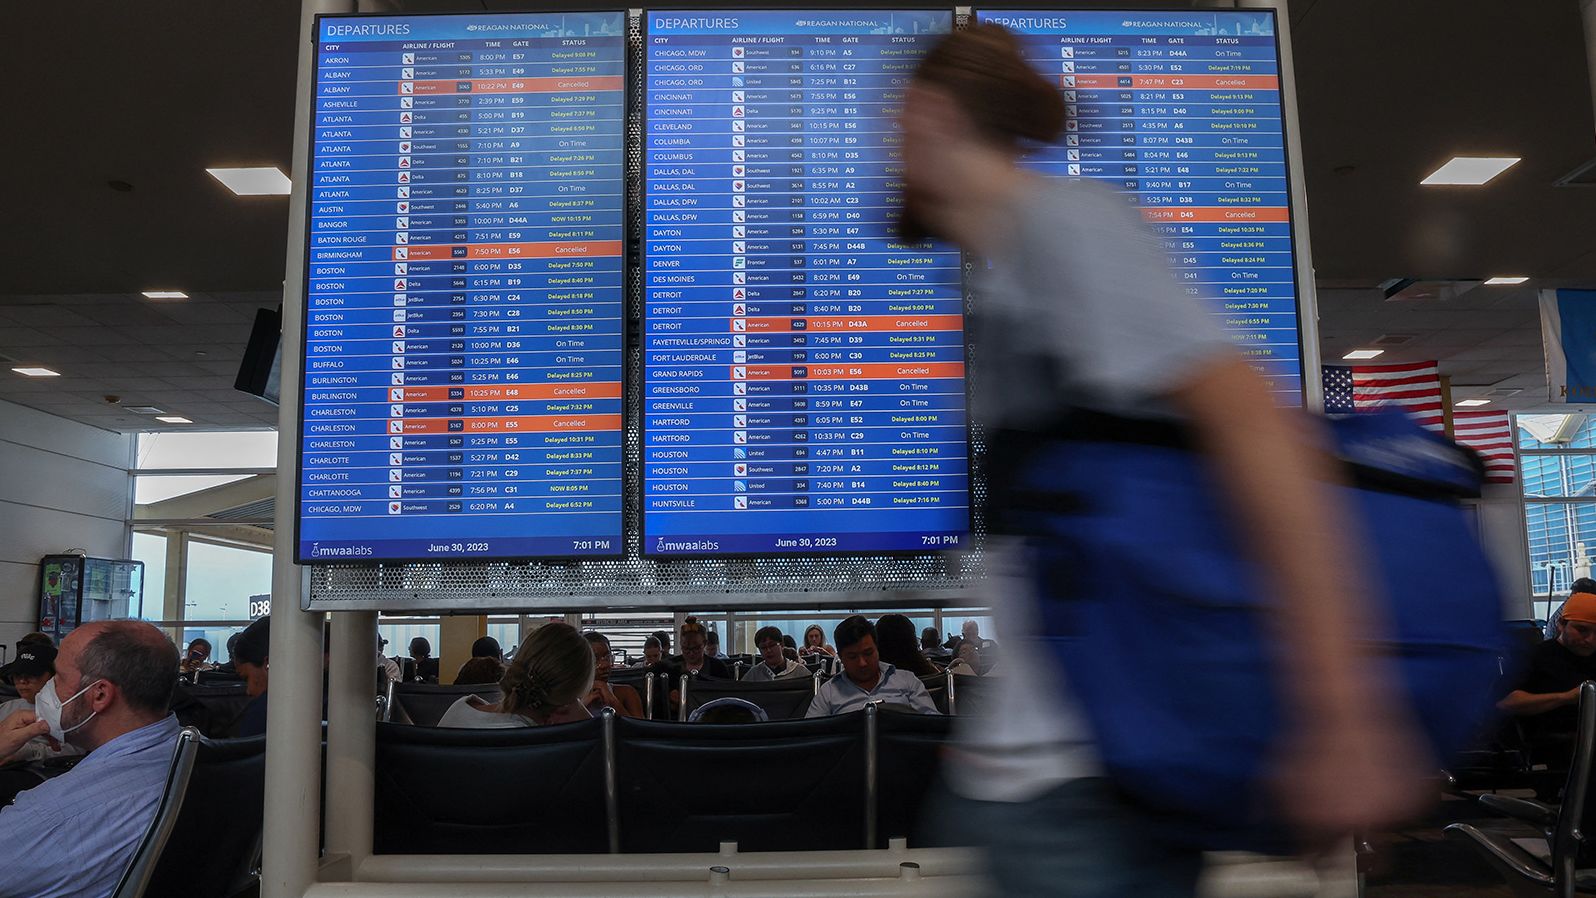 Travelers check the status of their flights ahead of the July 4th holiday weekend at Ronald Reagan Washington National Airport in Arlington, Virginia, U.S., June 30, 2023. REUTERS/Evelyn Hockstein